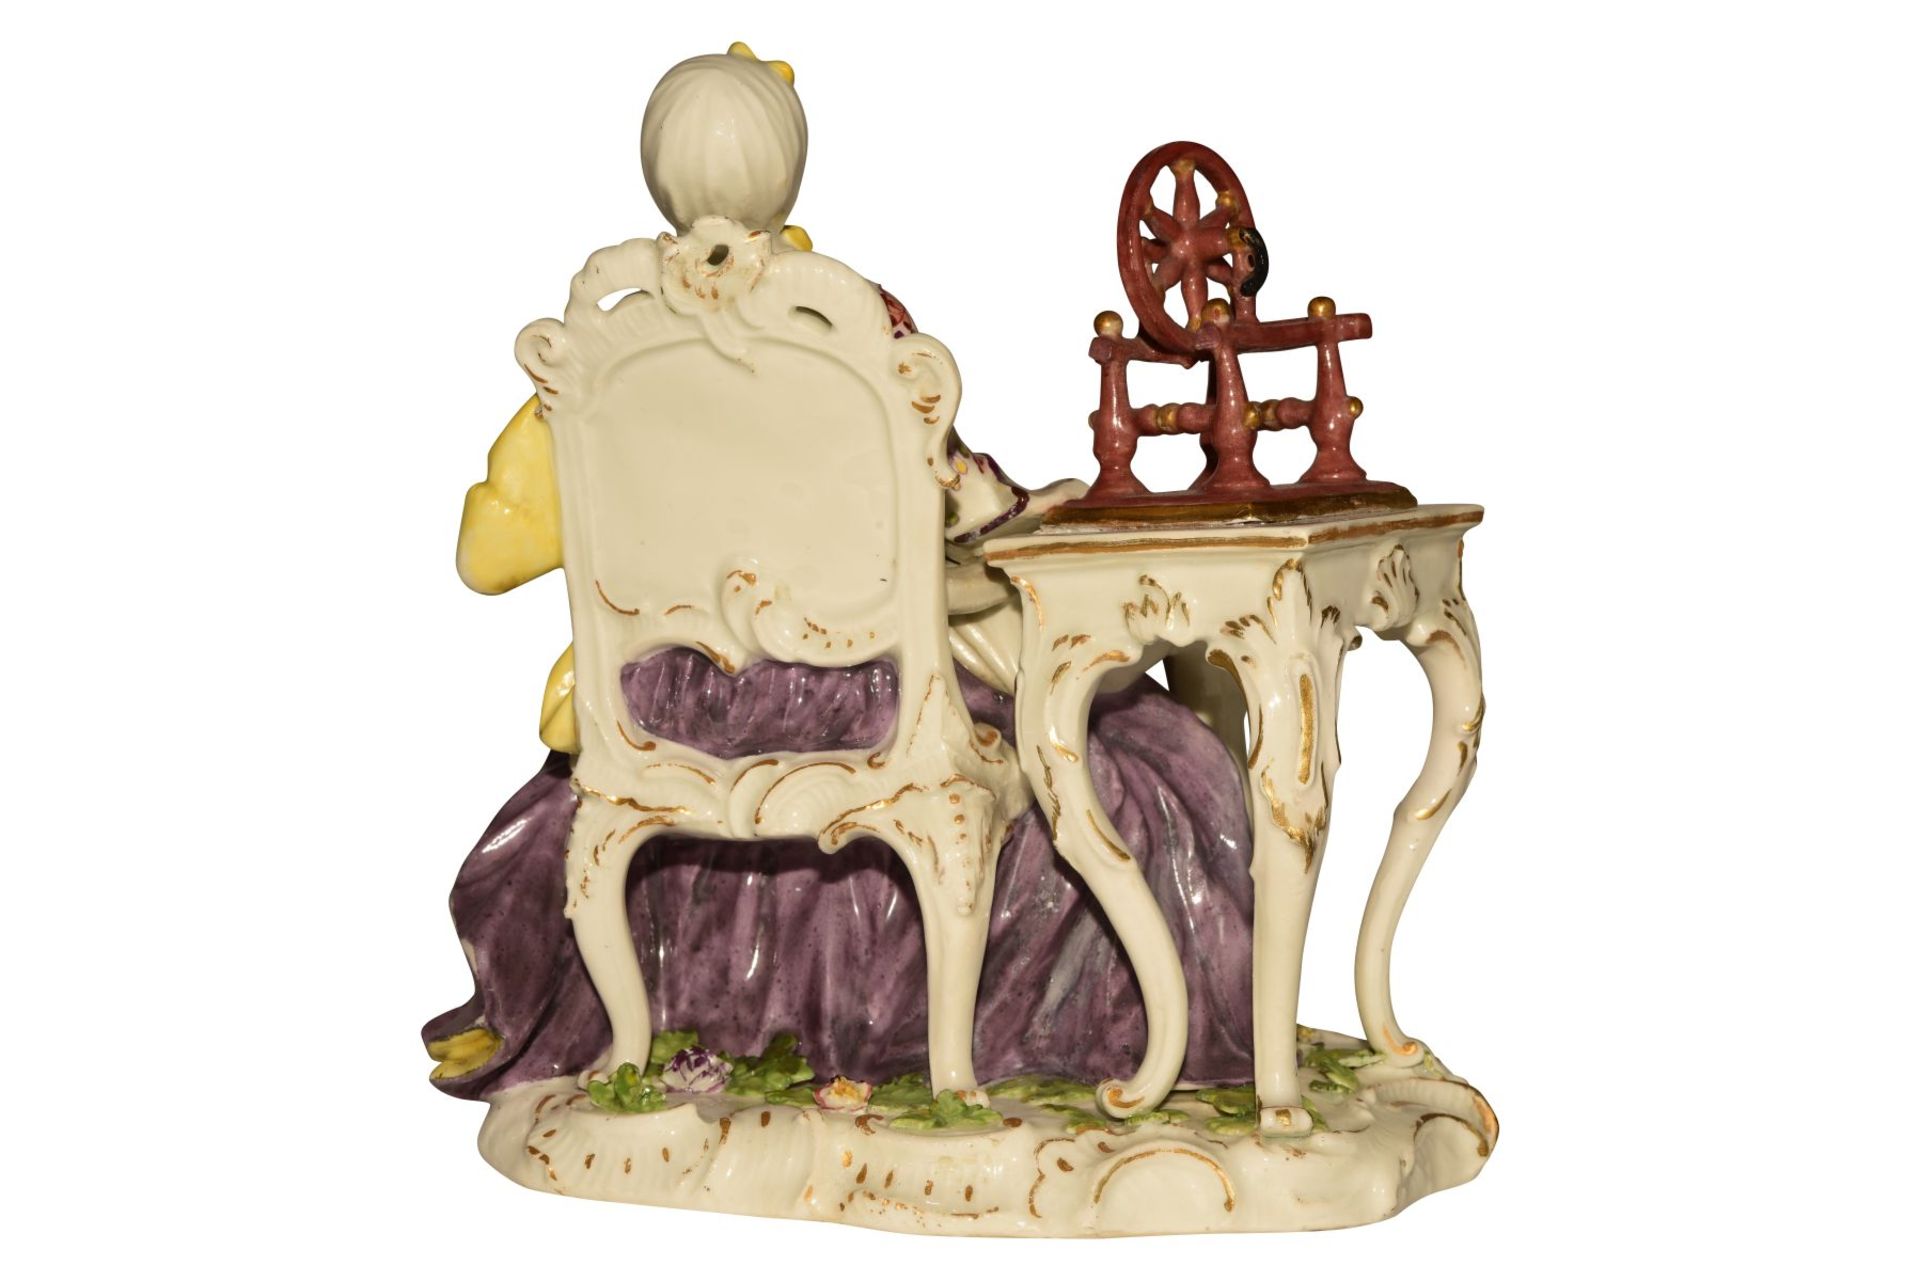 Lady with Spinning Wheel Meissen around 1750 - Image 4 of 10